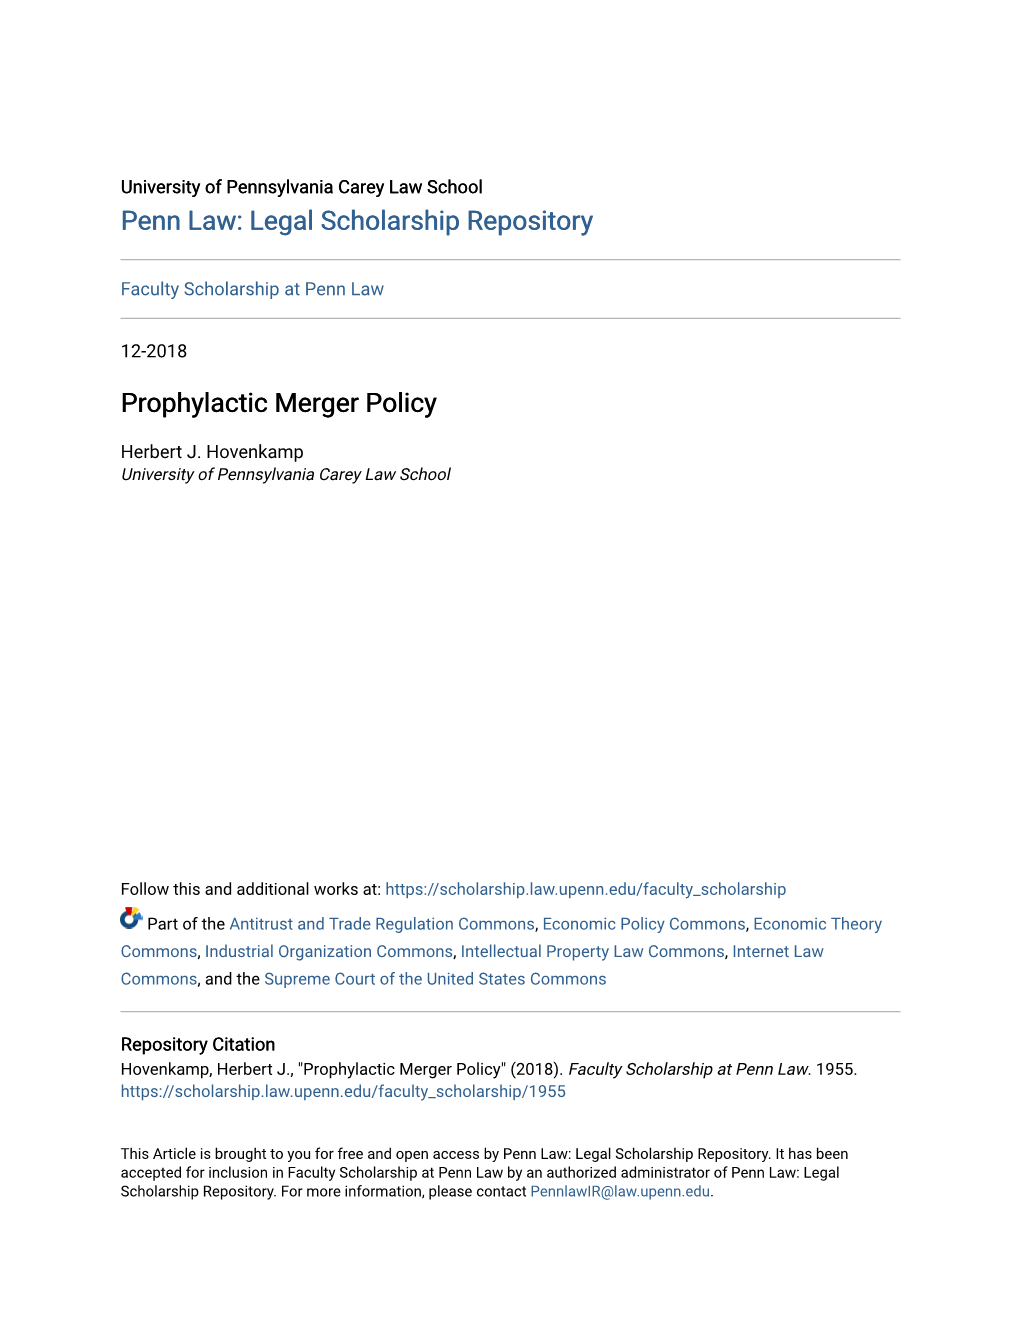 Prophylactic Merger Policy